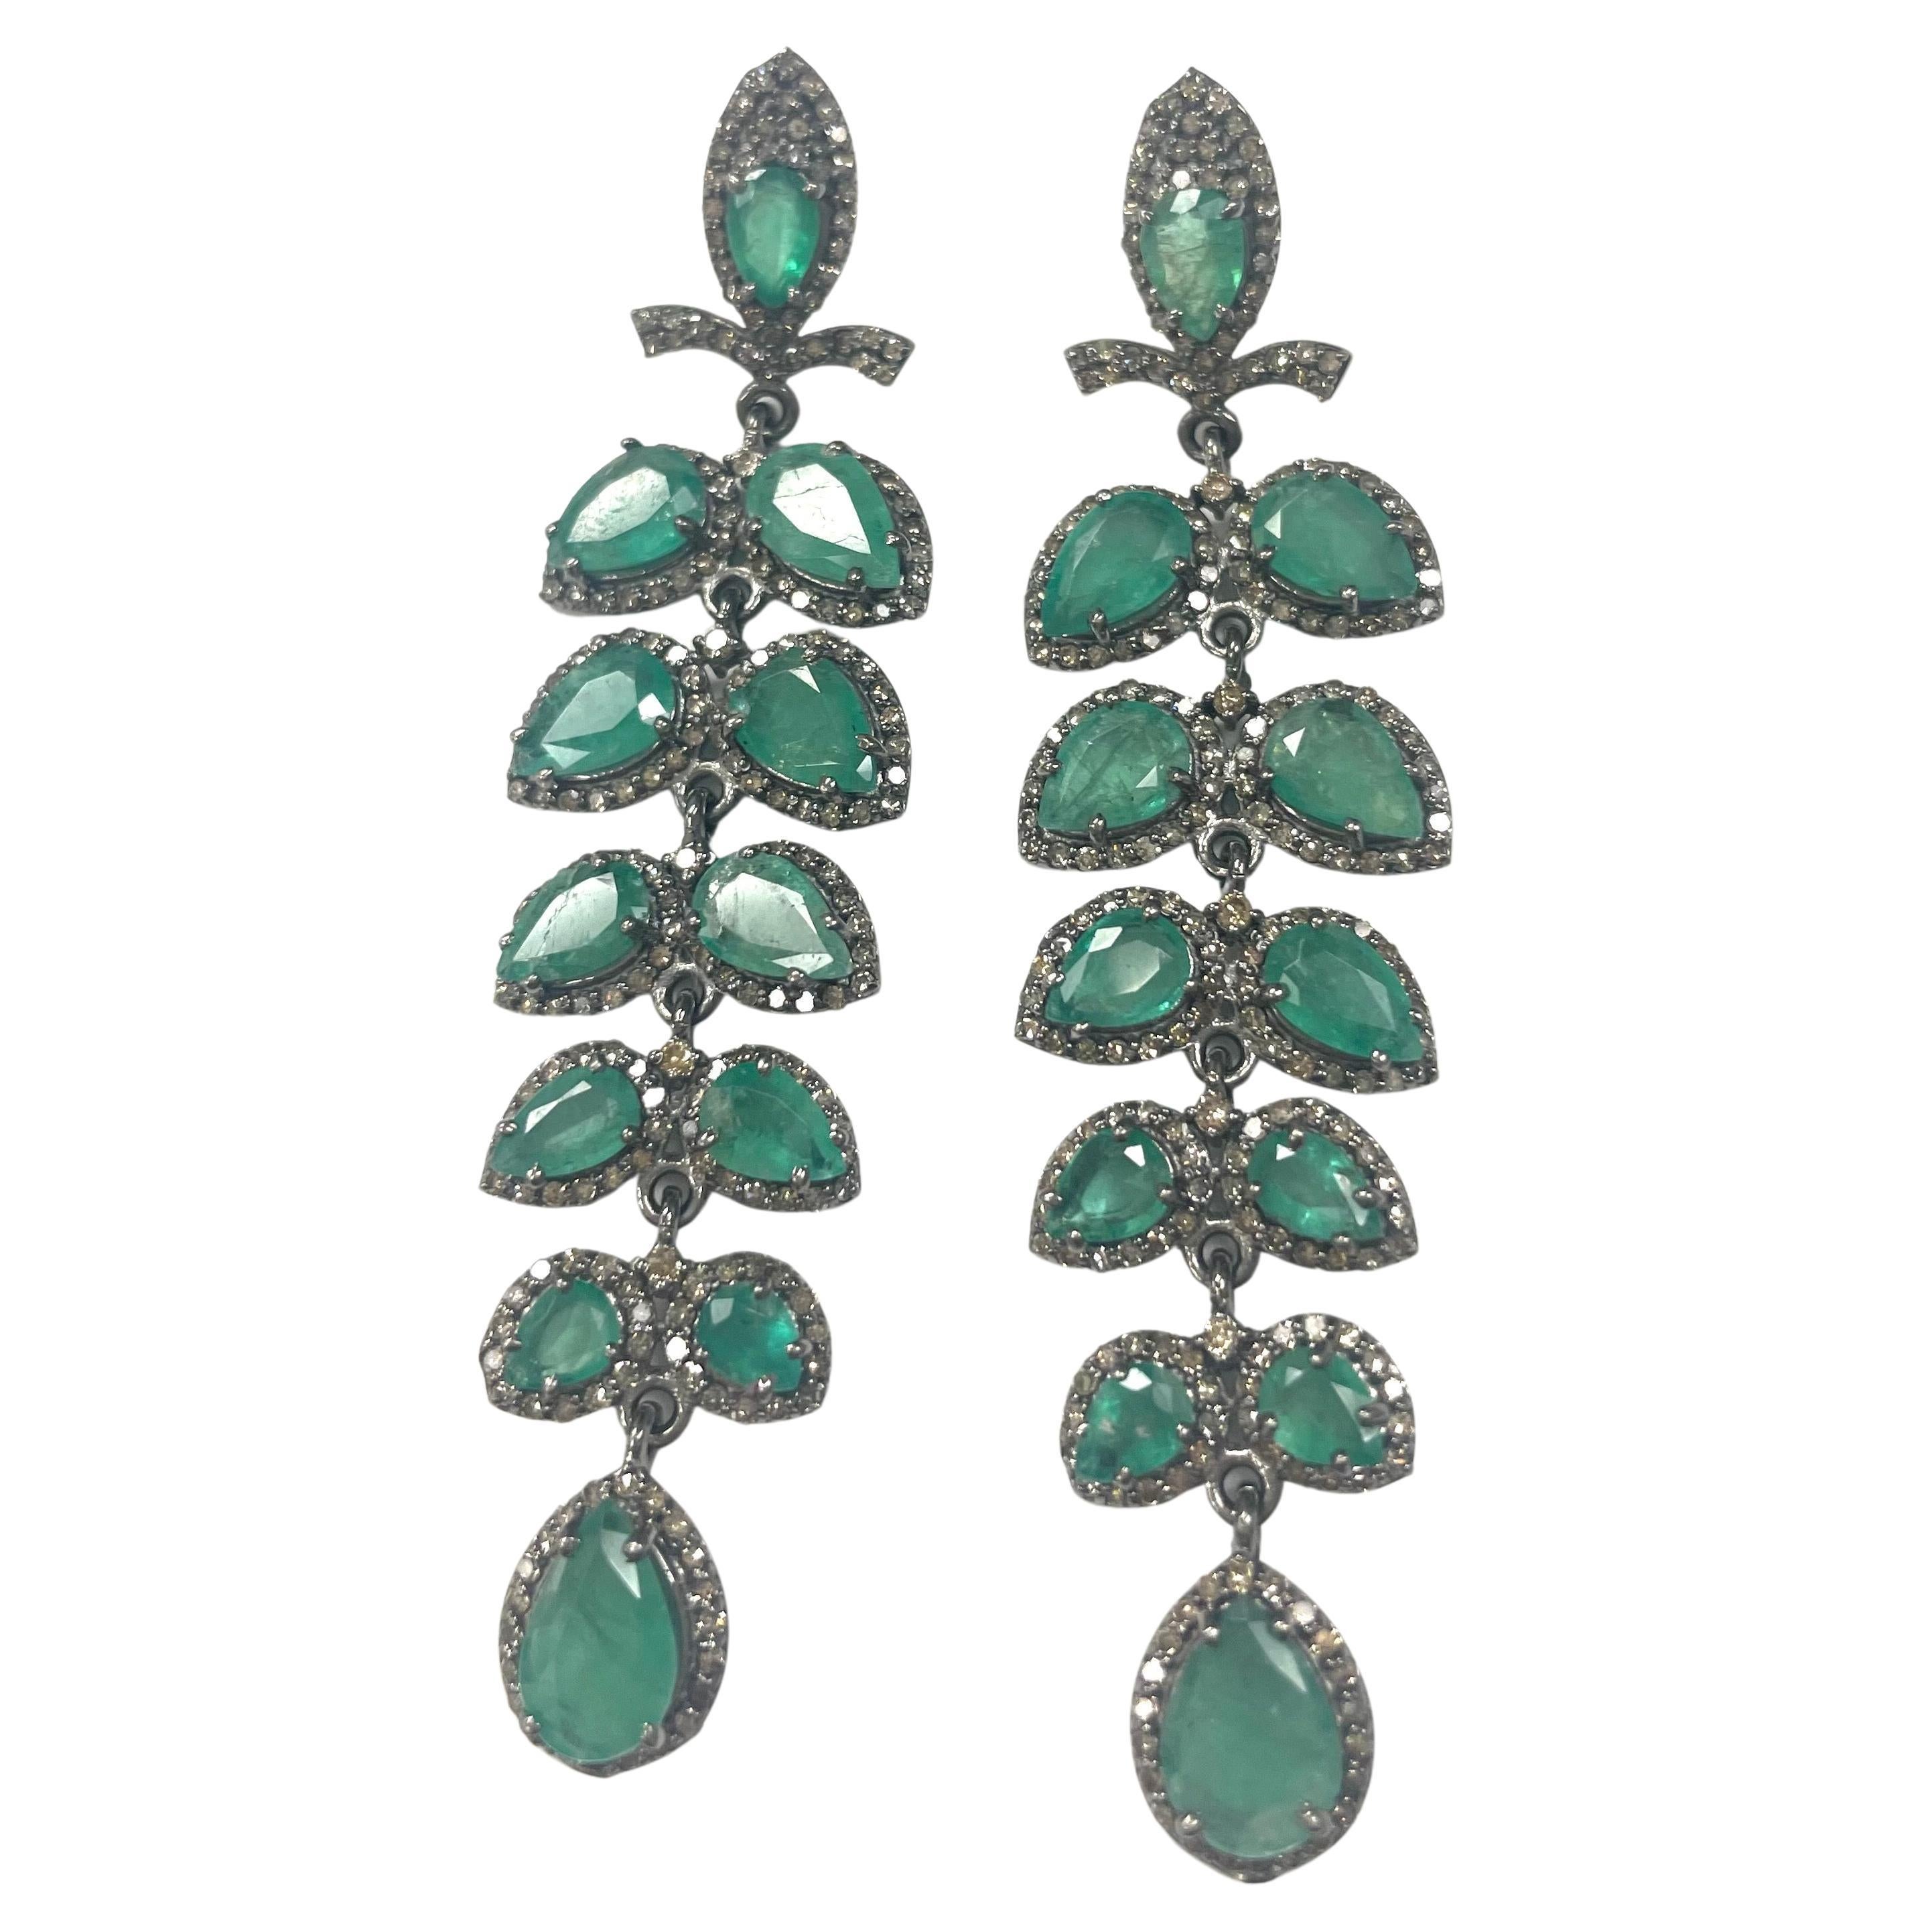 Description
Exquisite vibrant green Emeralds, individually framed with pave diamonds creating an elegant stylish statement of beauty and movement. Item #E3309

Materials and Weight
Emeralds, 16 carats, faceted pear shapes
Diamonds, 3.74